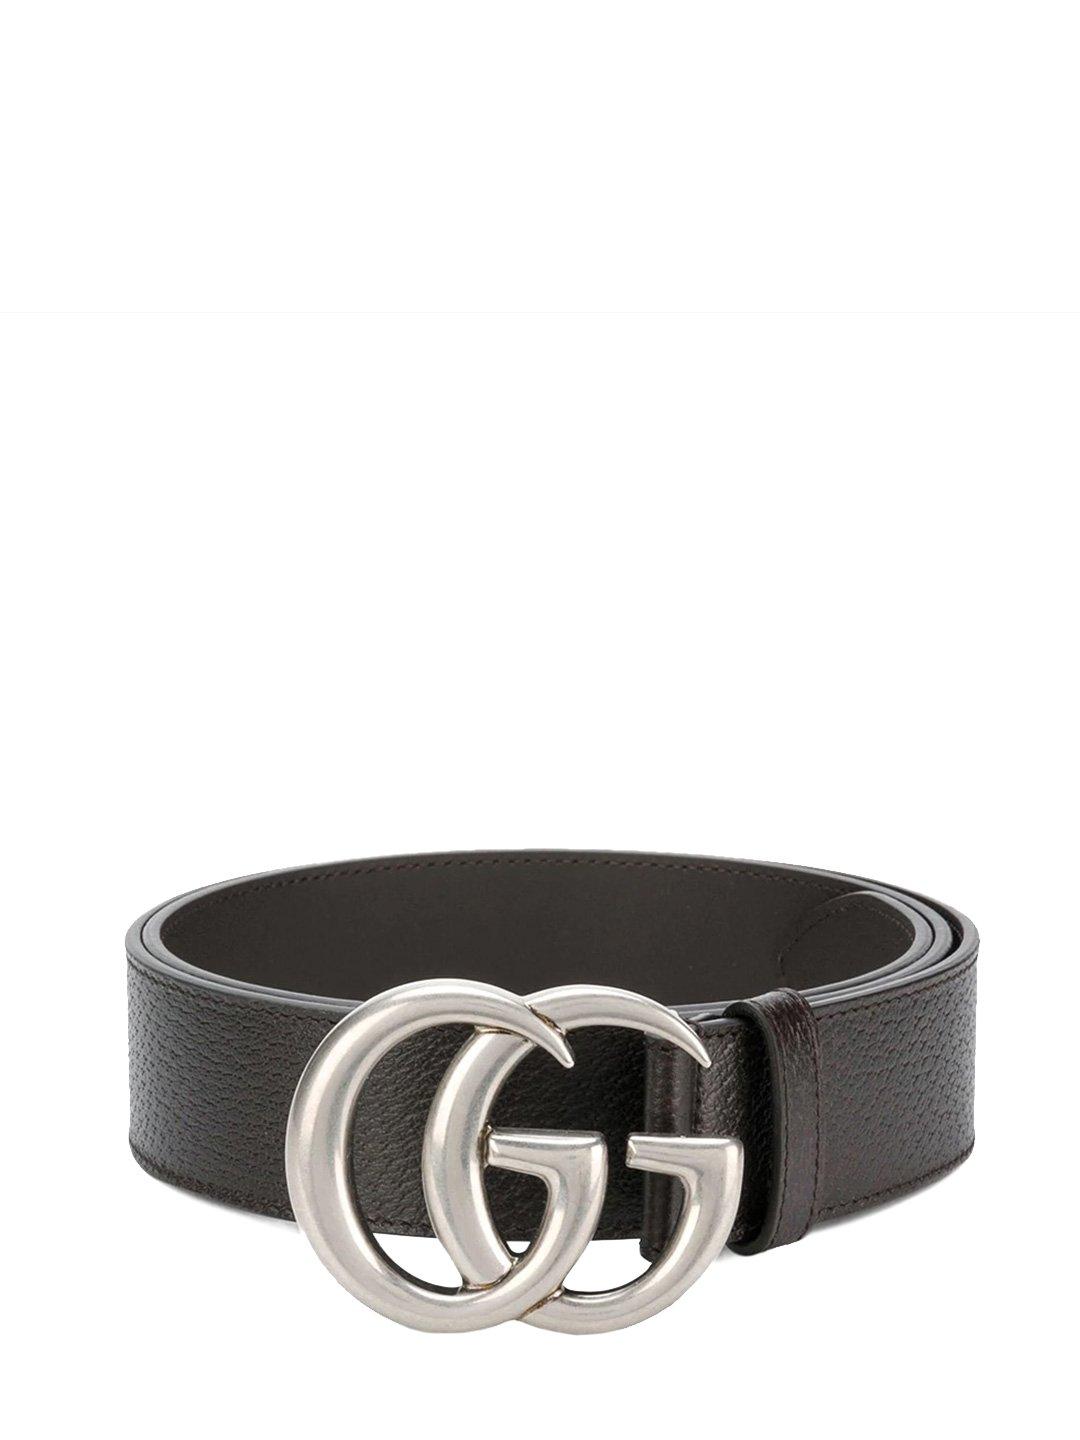 gucci black belt with silver buckle